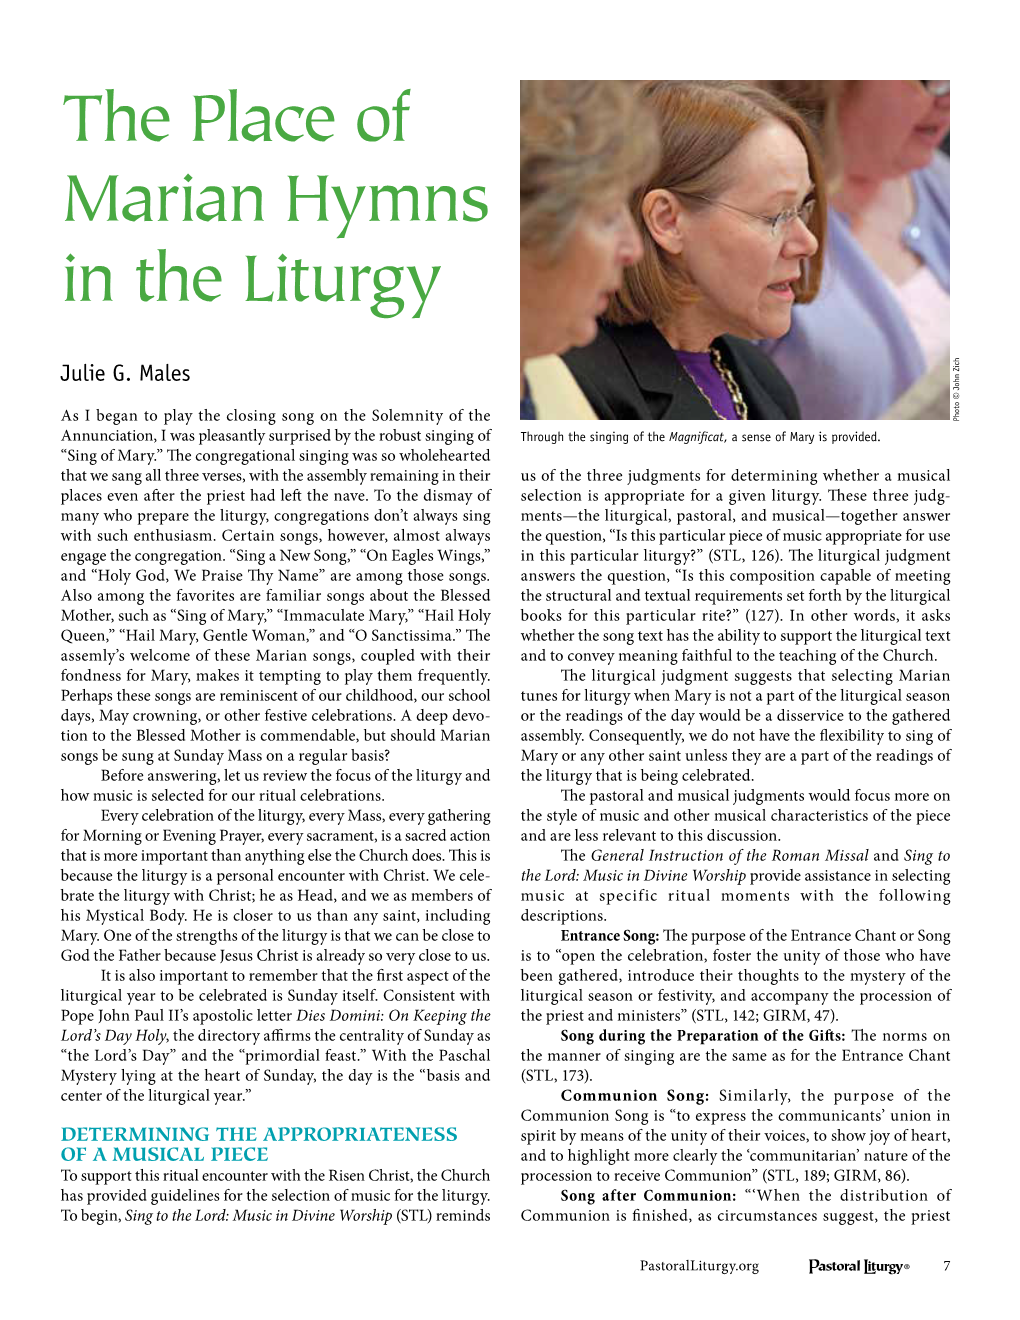 The Place of Marian Hymns in the Liturgy